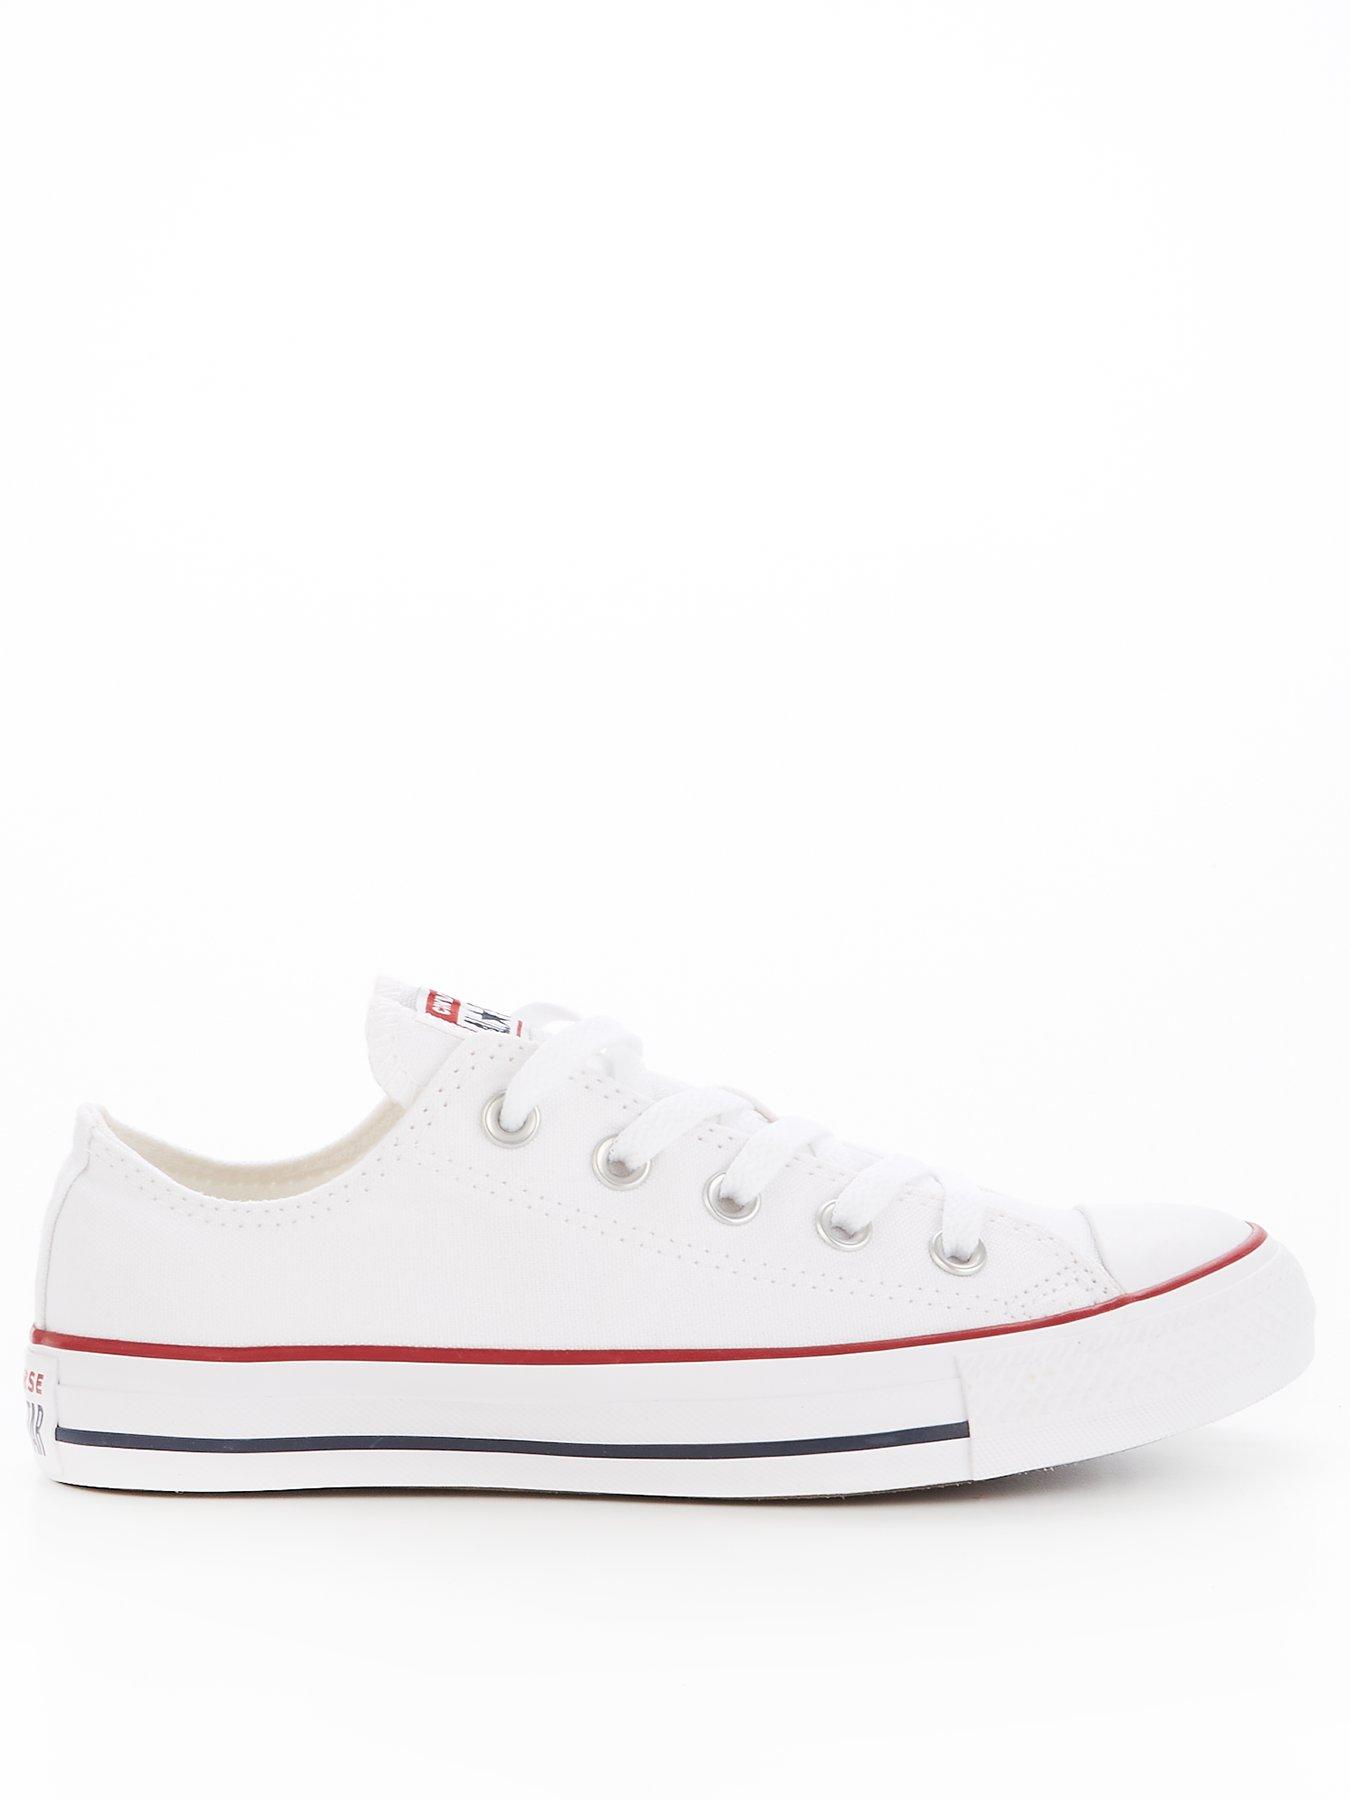  Converse Chuck Taylor All Star Ox Low Top Optical White  Sneakers - 6.5 D(M) US